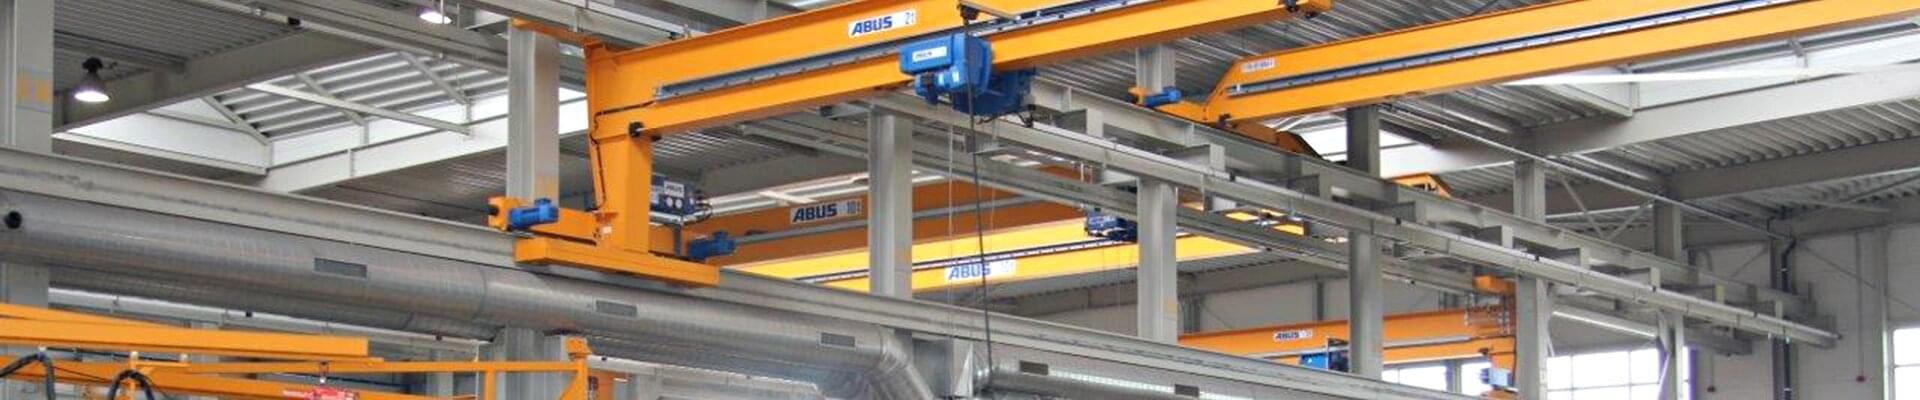 Wall-mounted overhead crane with a trolley in use for construction and serial welding work